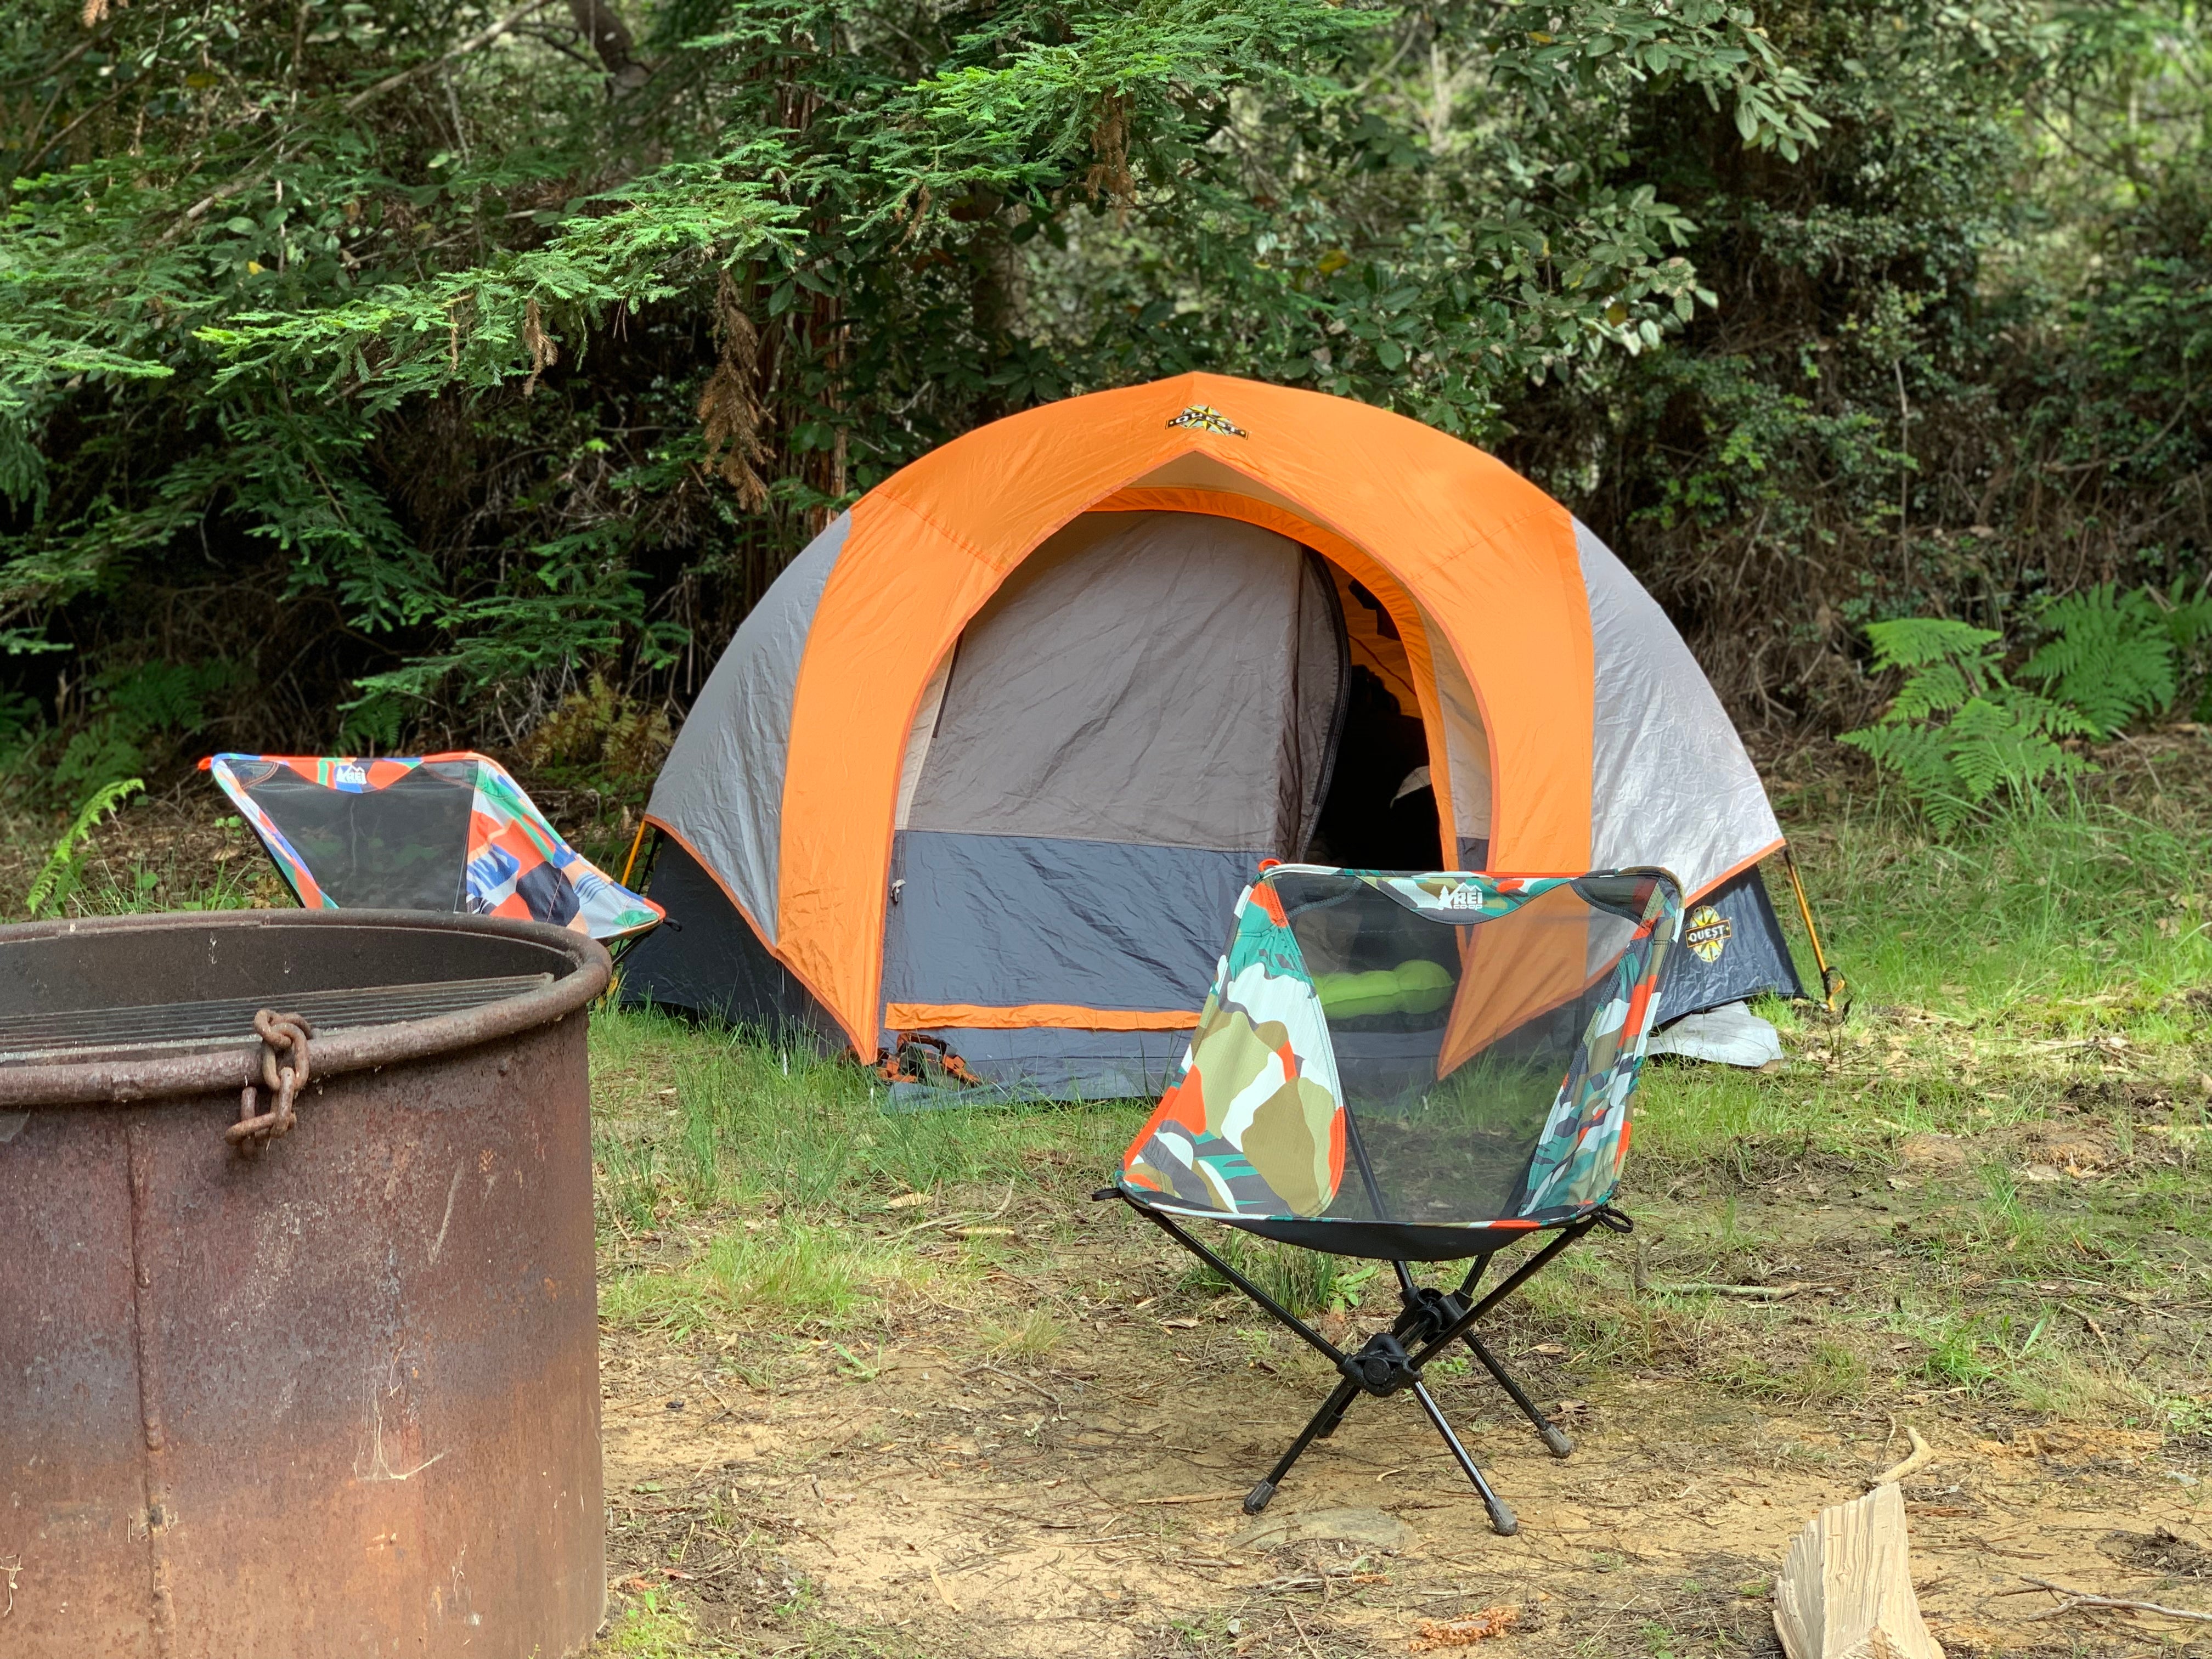 Most campsites at Woodside are tucked back in wooded nooks with large fire pits.